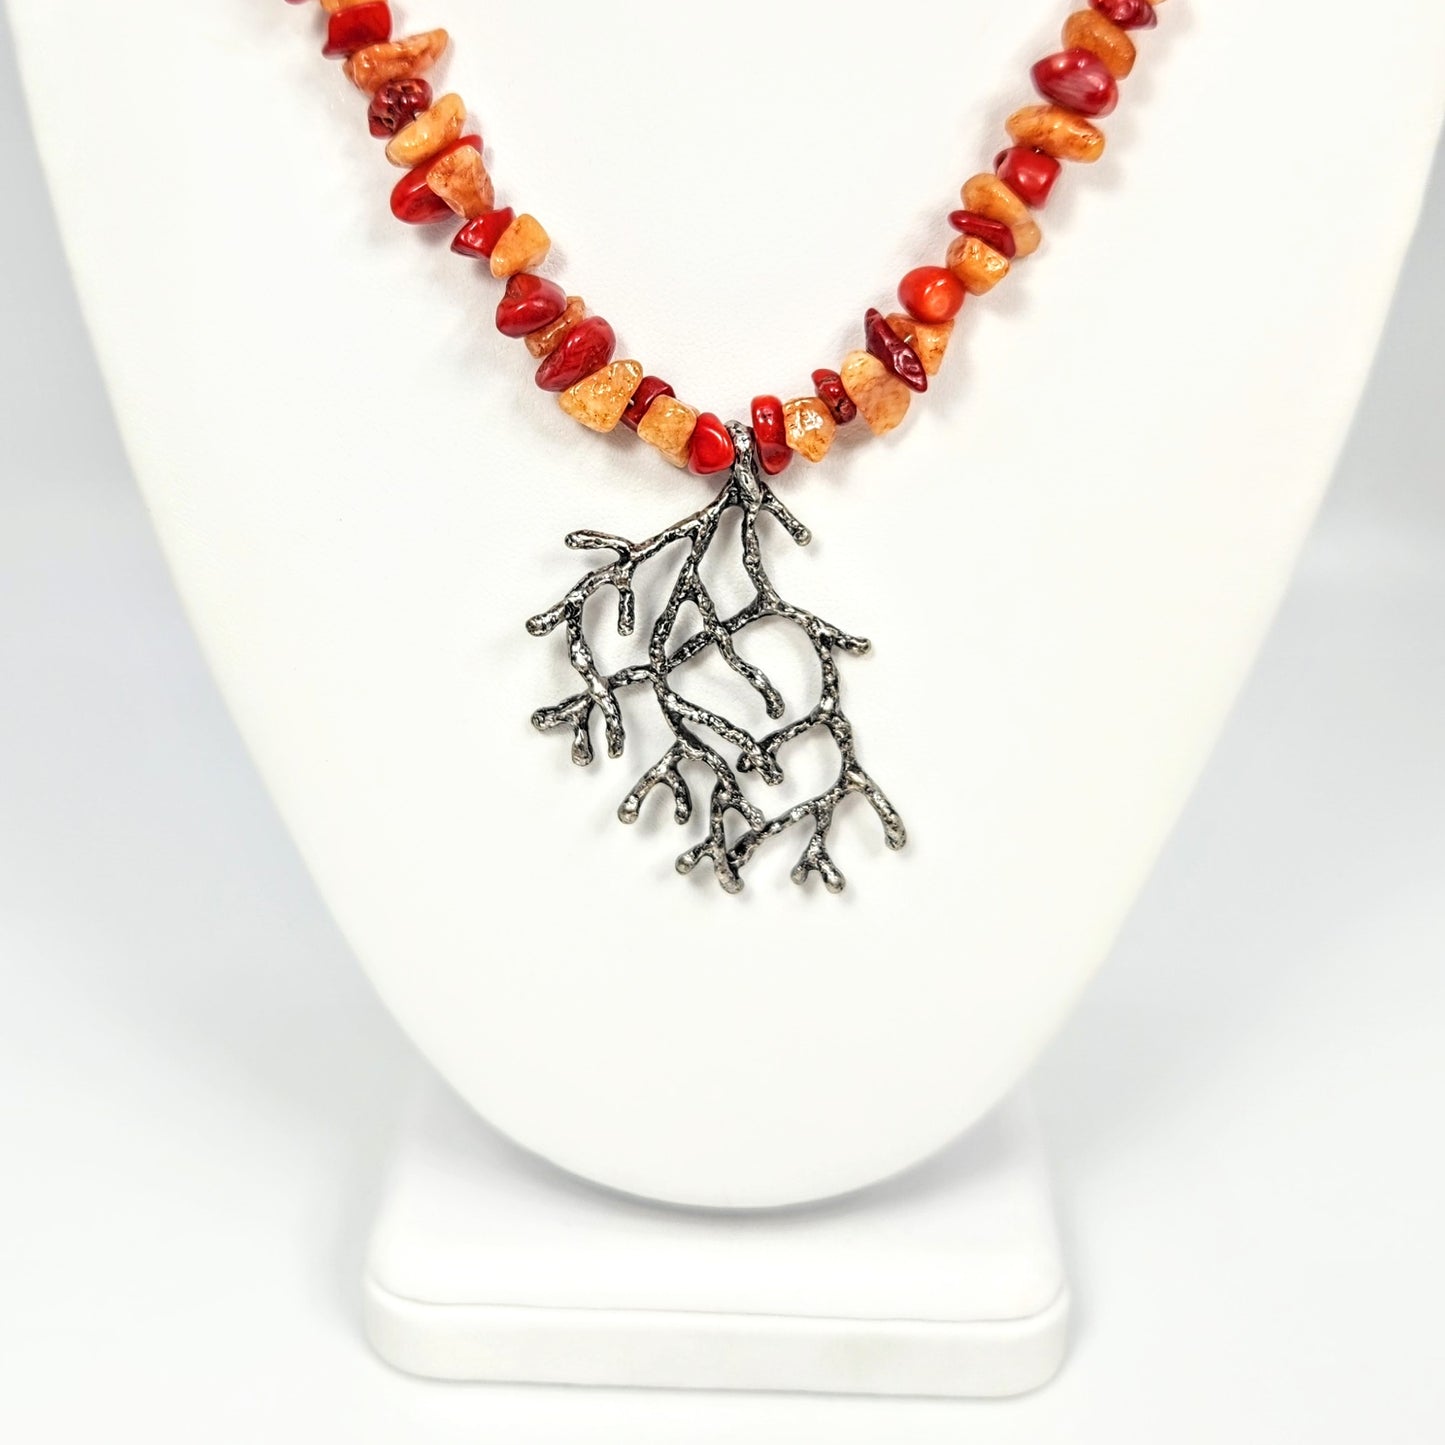 Coral Pendant + Dyed Bamboo and Quartz Chip Necklace